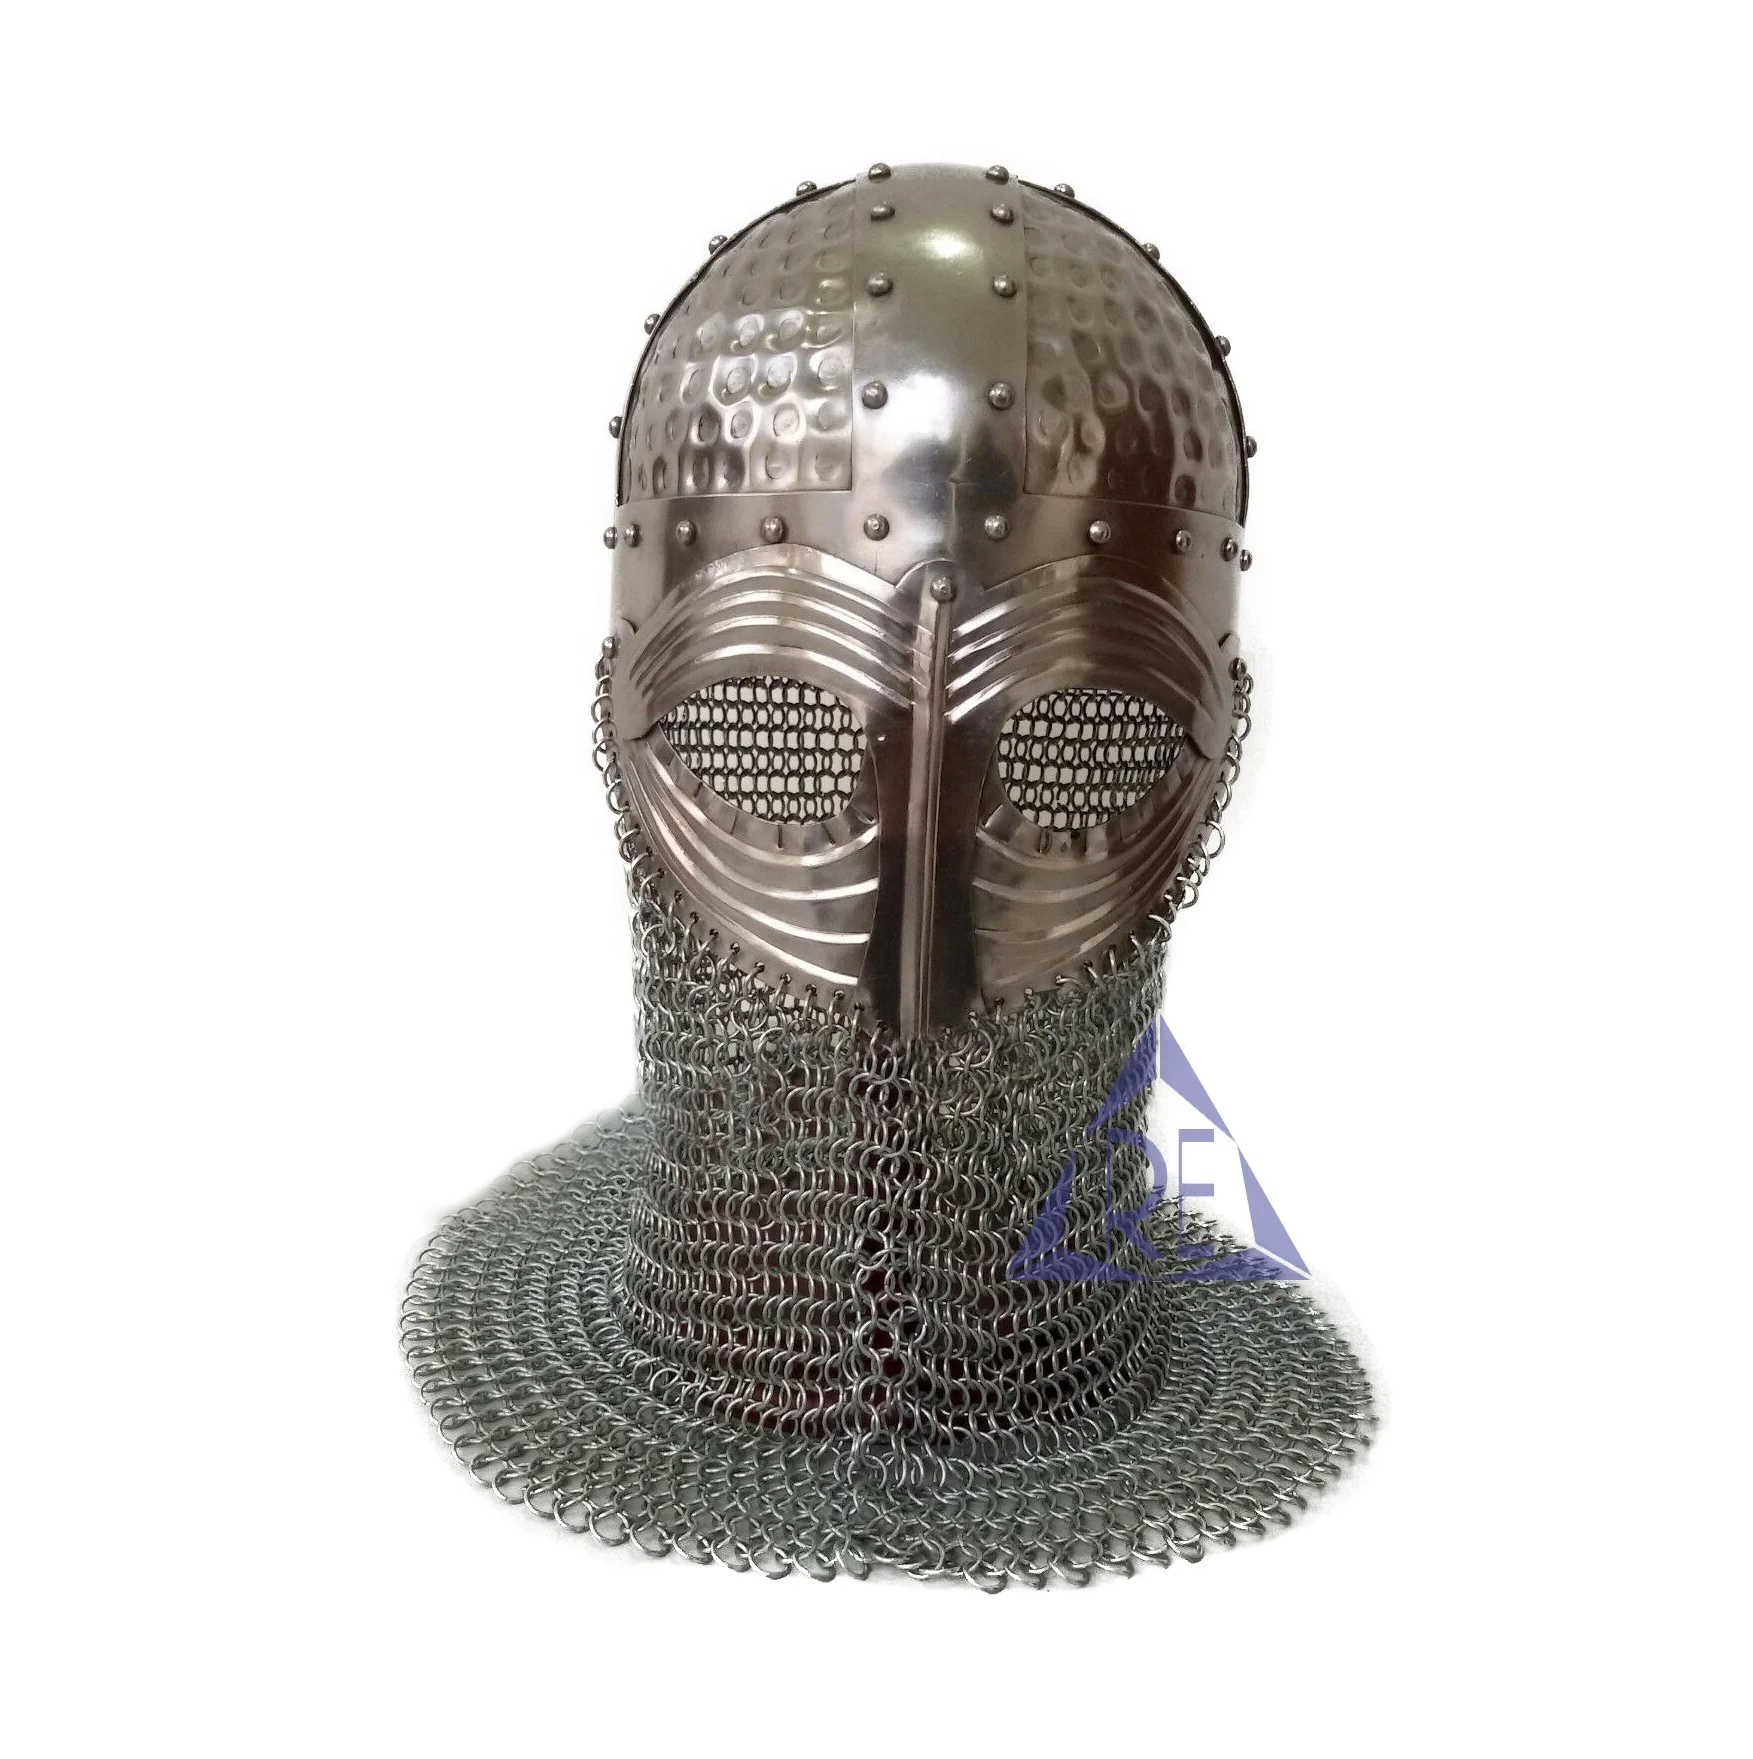 Medieval Spectacle Viking Armor Helmet Halloween Costume Silver Exp Shipping. 